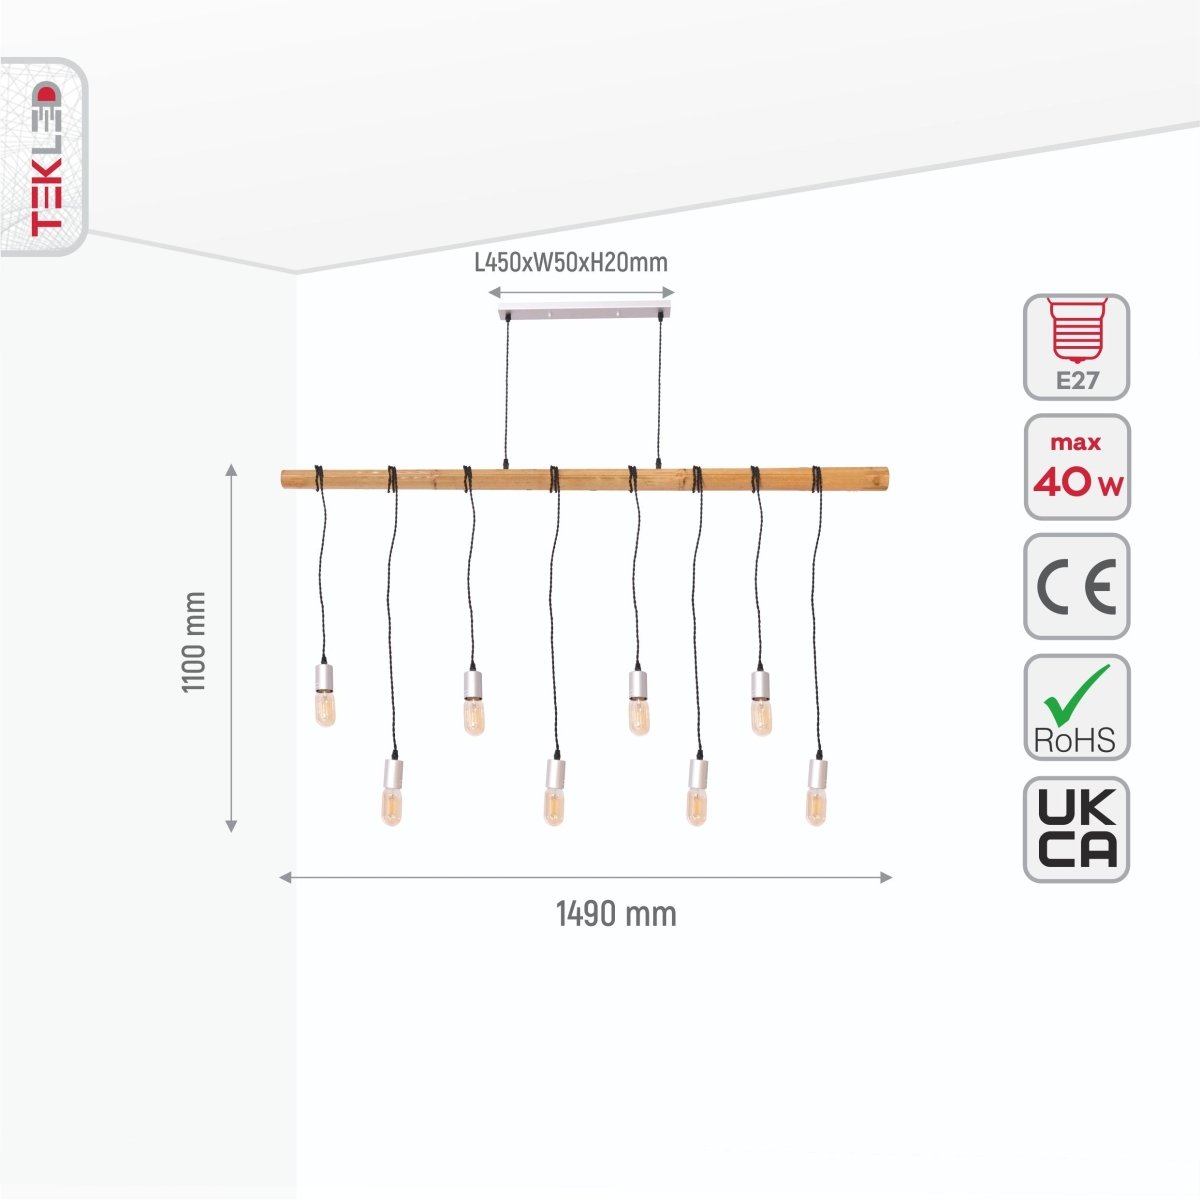 Size and specs of Wood Rod Multi Pendant Island Chandelier with 8xE27 Fittings | TEKLED 159-17504